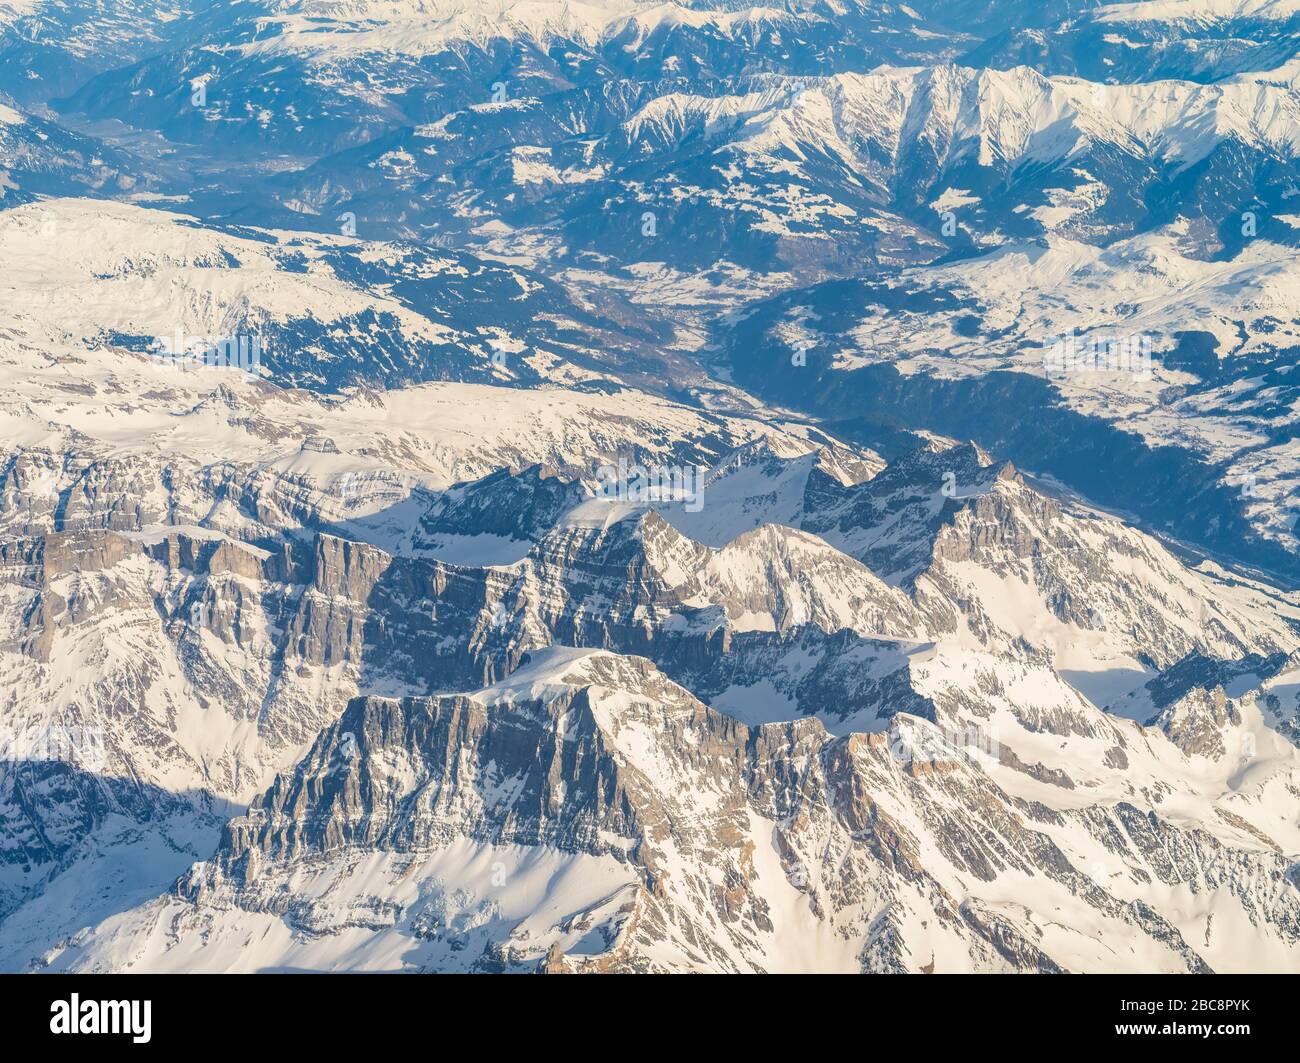 Aerial view, Swiss Alps with snowy mountains Stock Photo